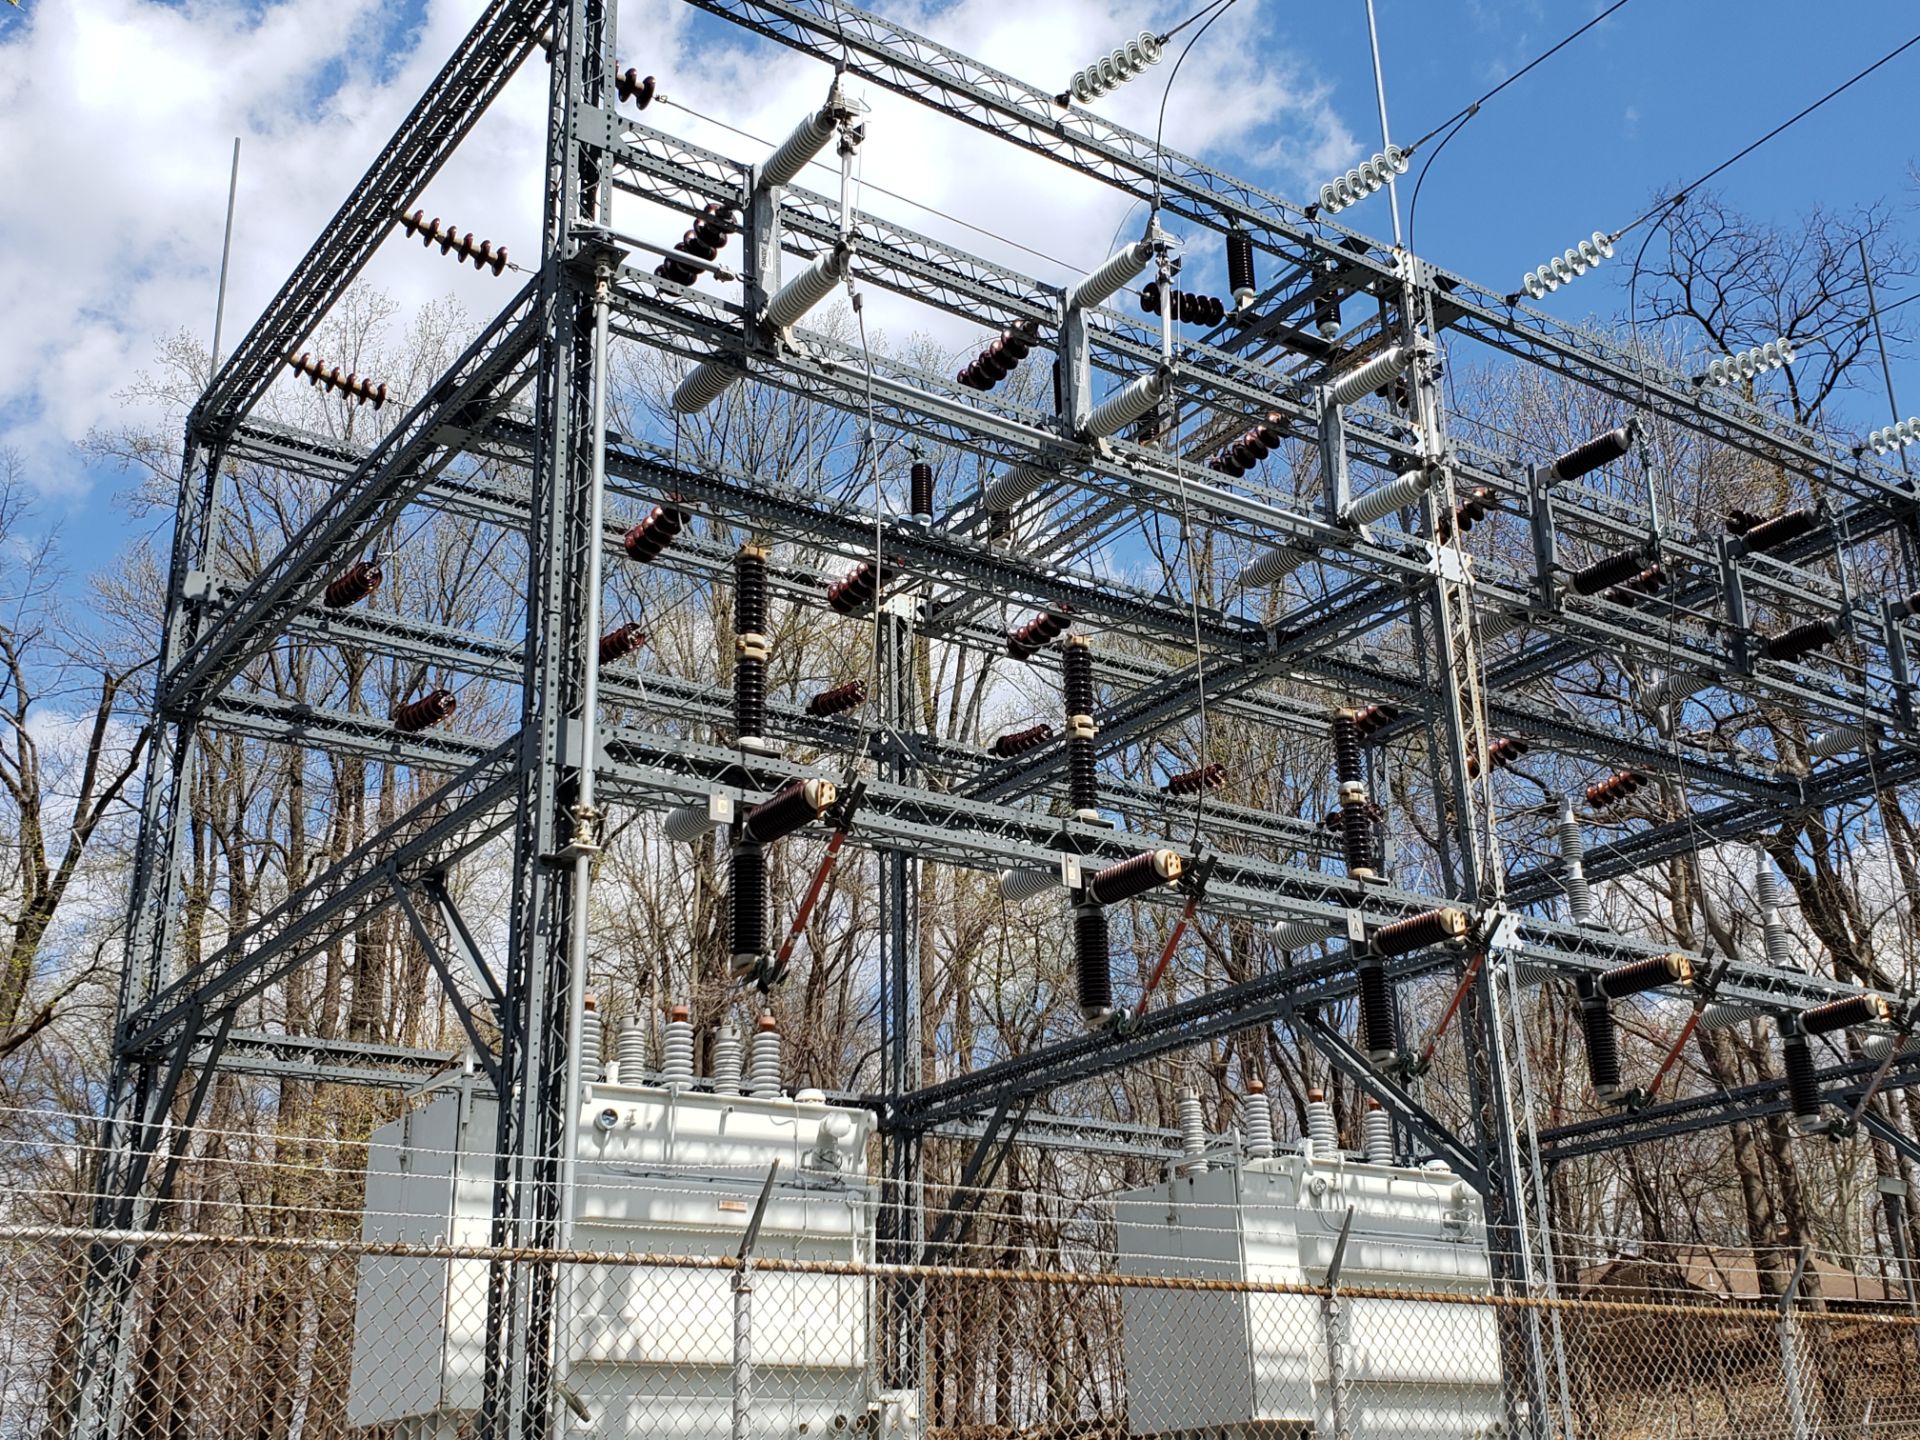 Electrical substation serving the TecPort business park - Image 11 of 15